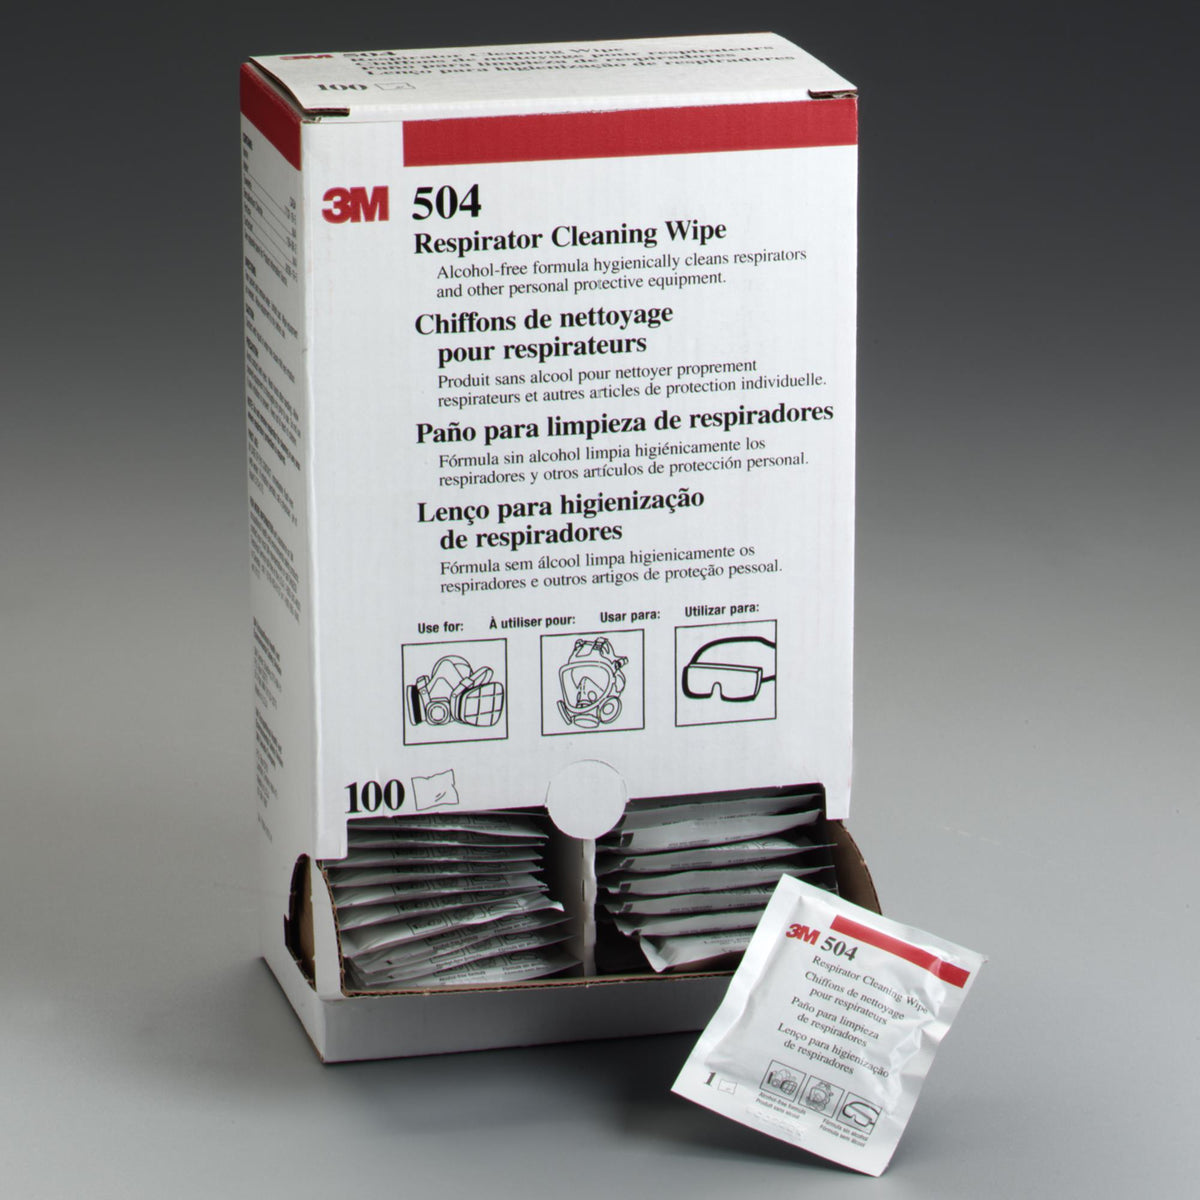 3M 504 Respirator Cleaning Wipes 100/box - W-WEL13595